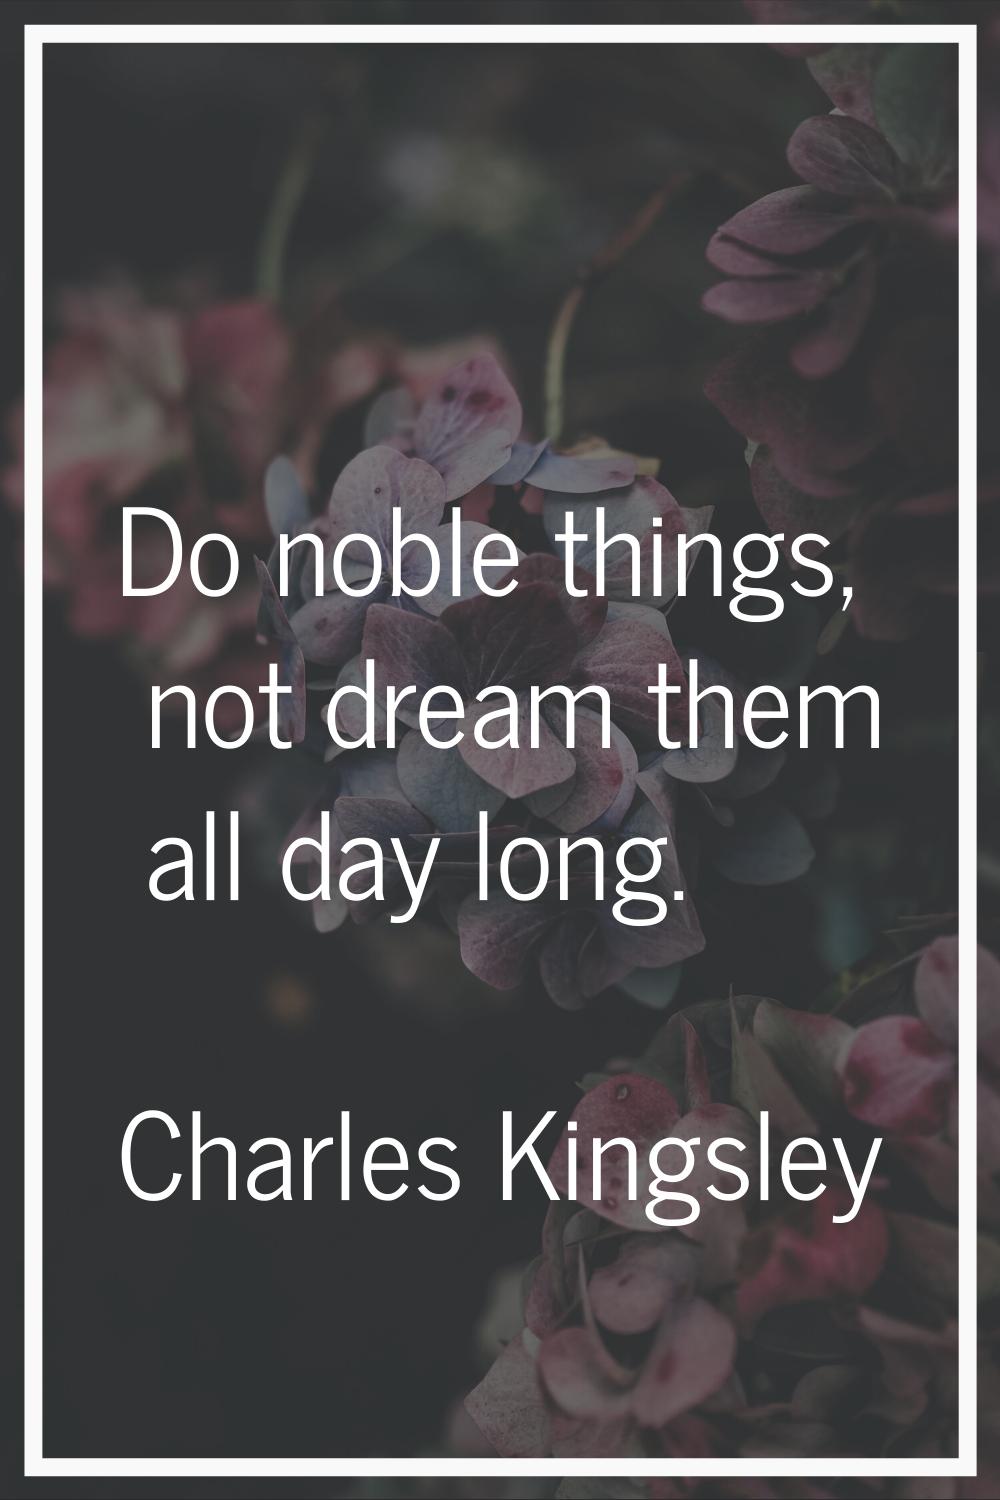 Do noble things, not dream them all day long.